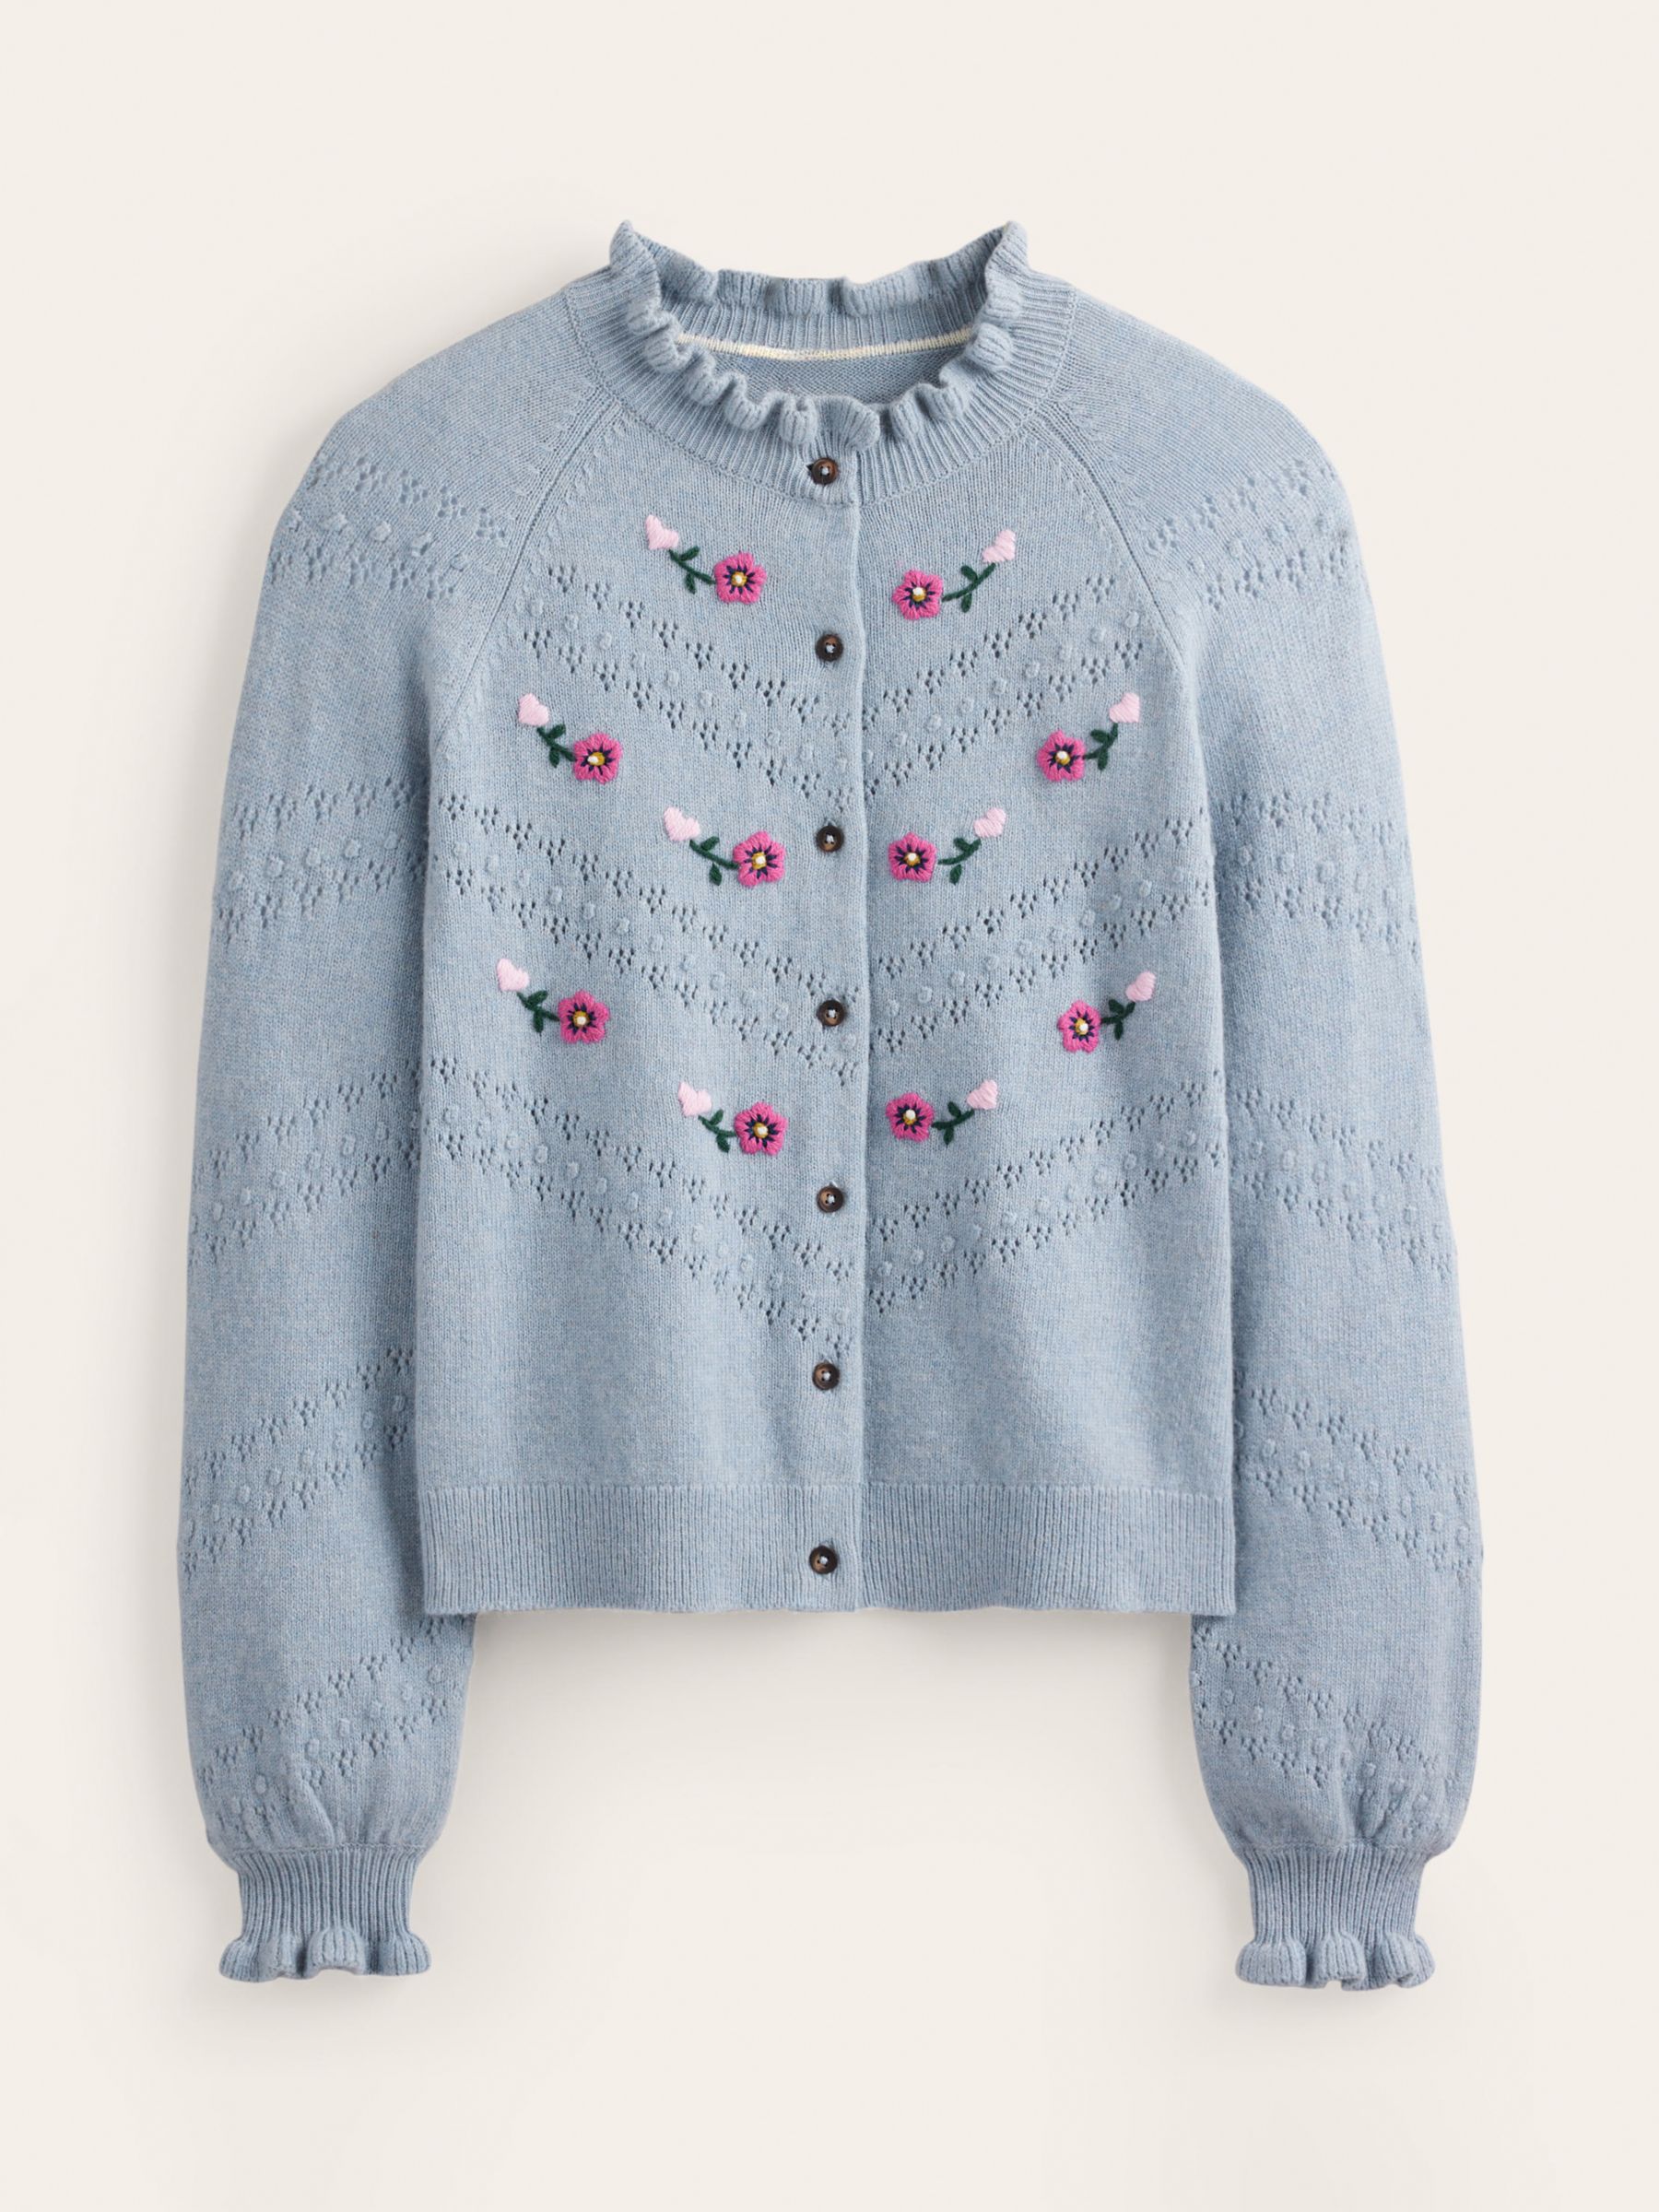 Boden Floral Embroidered Cardigan, Blue Pebble, XS